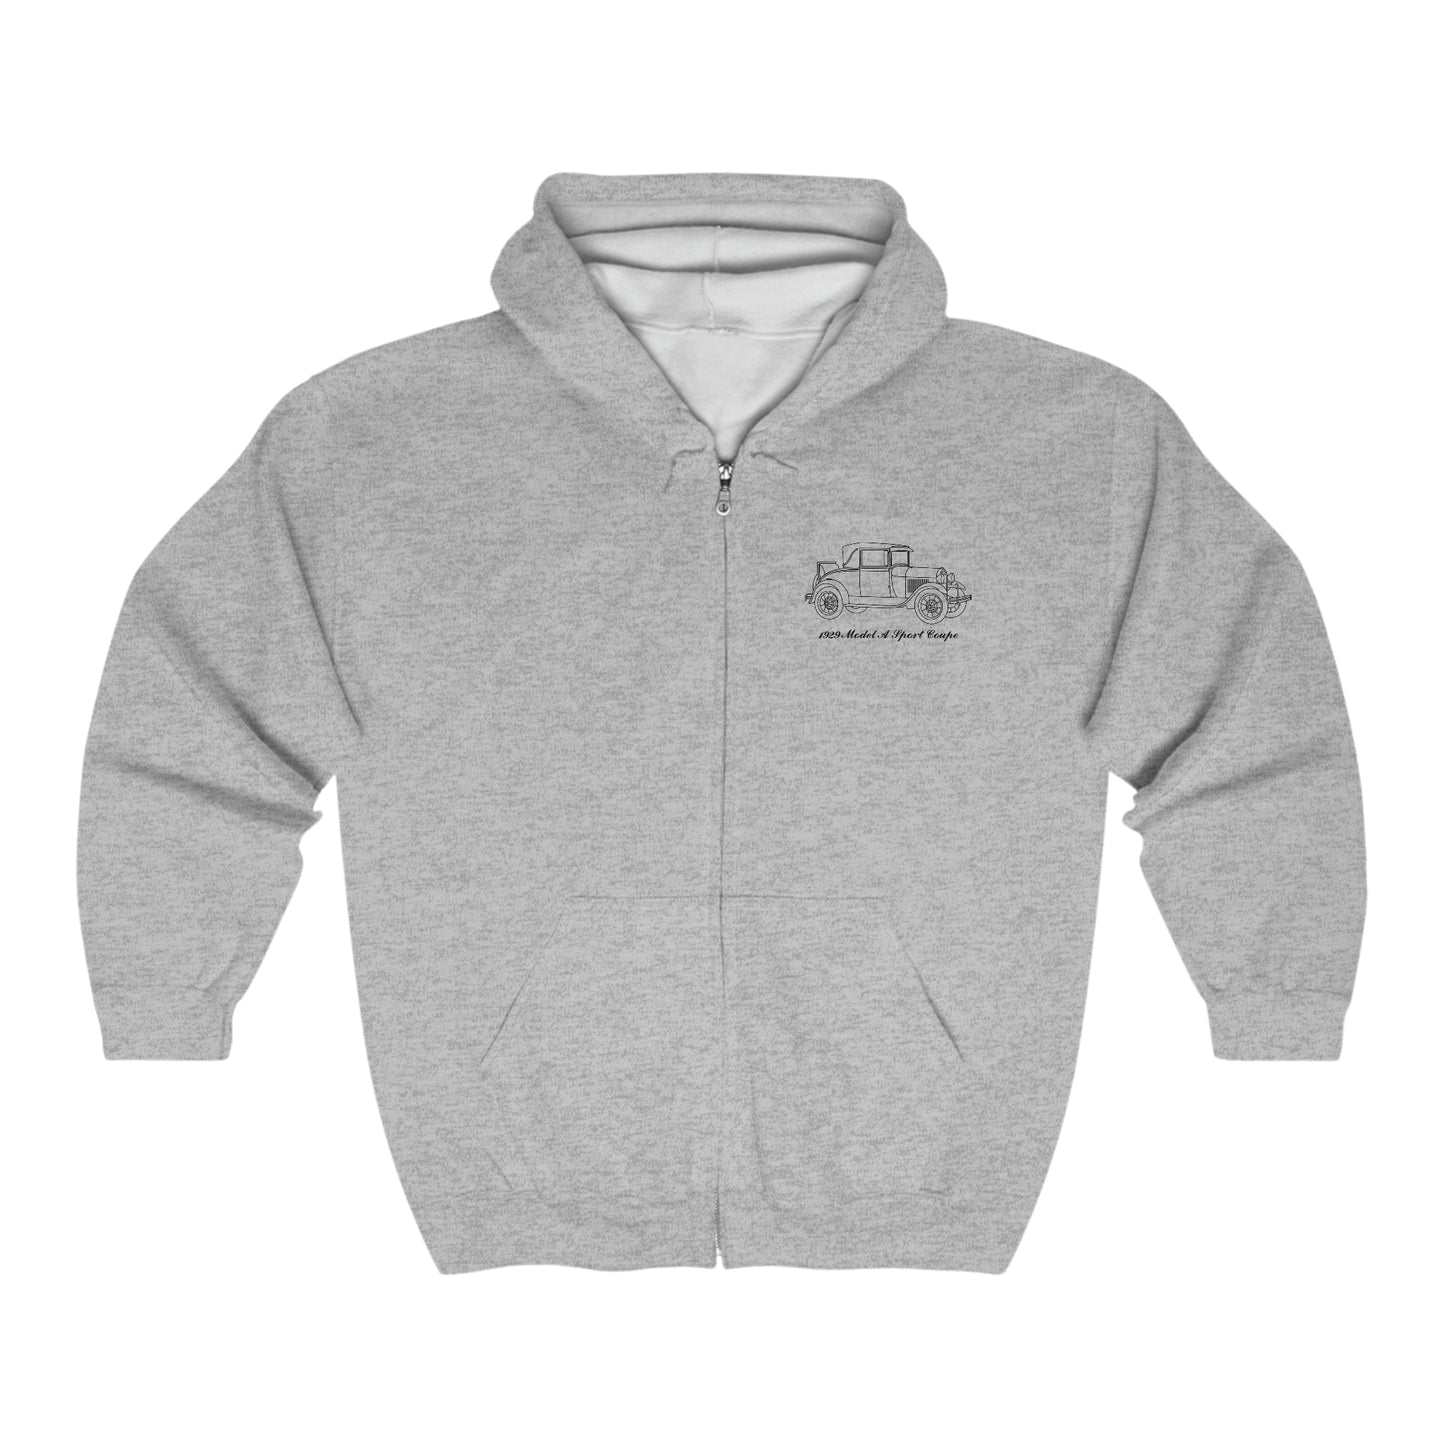 1929 Sport Coupe Hoodie